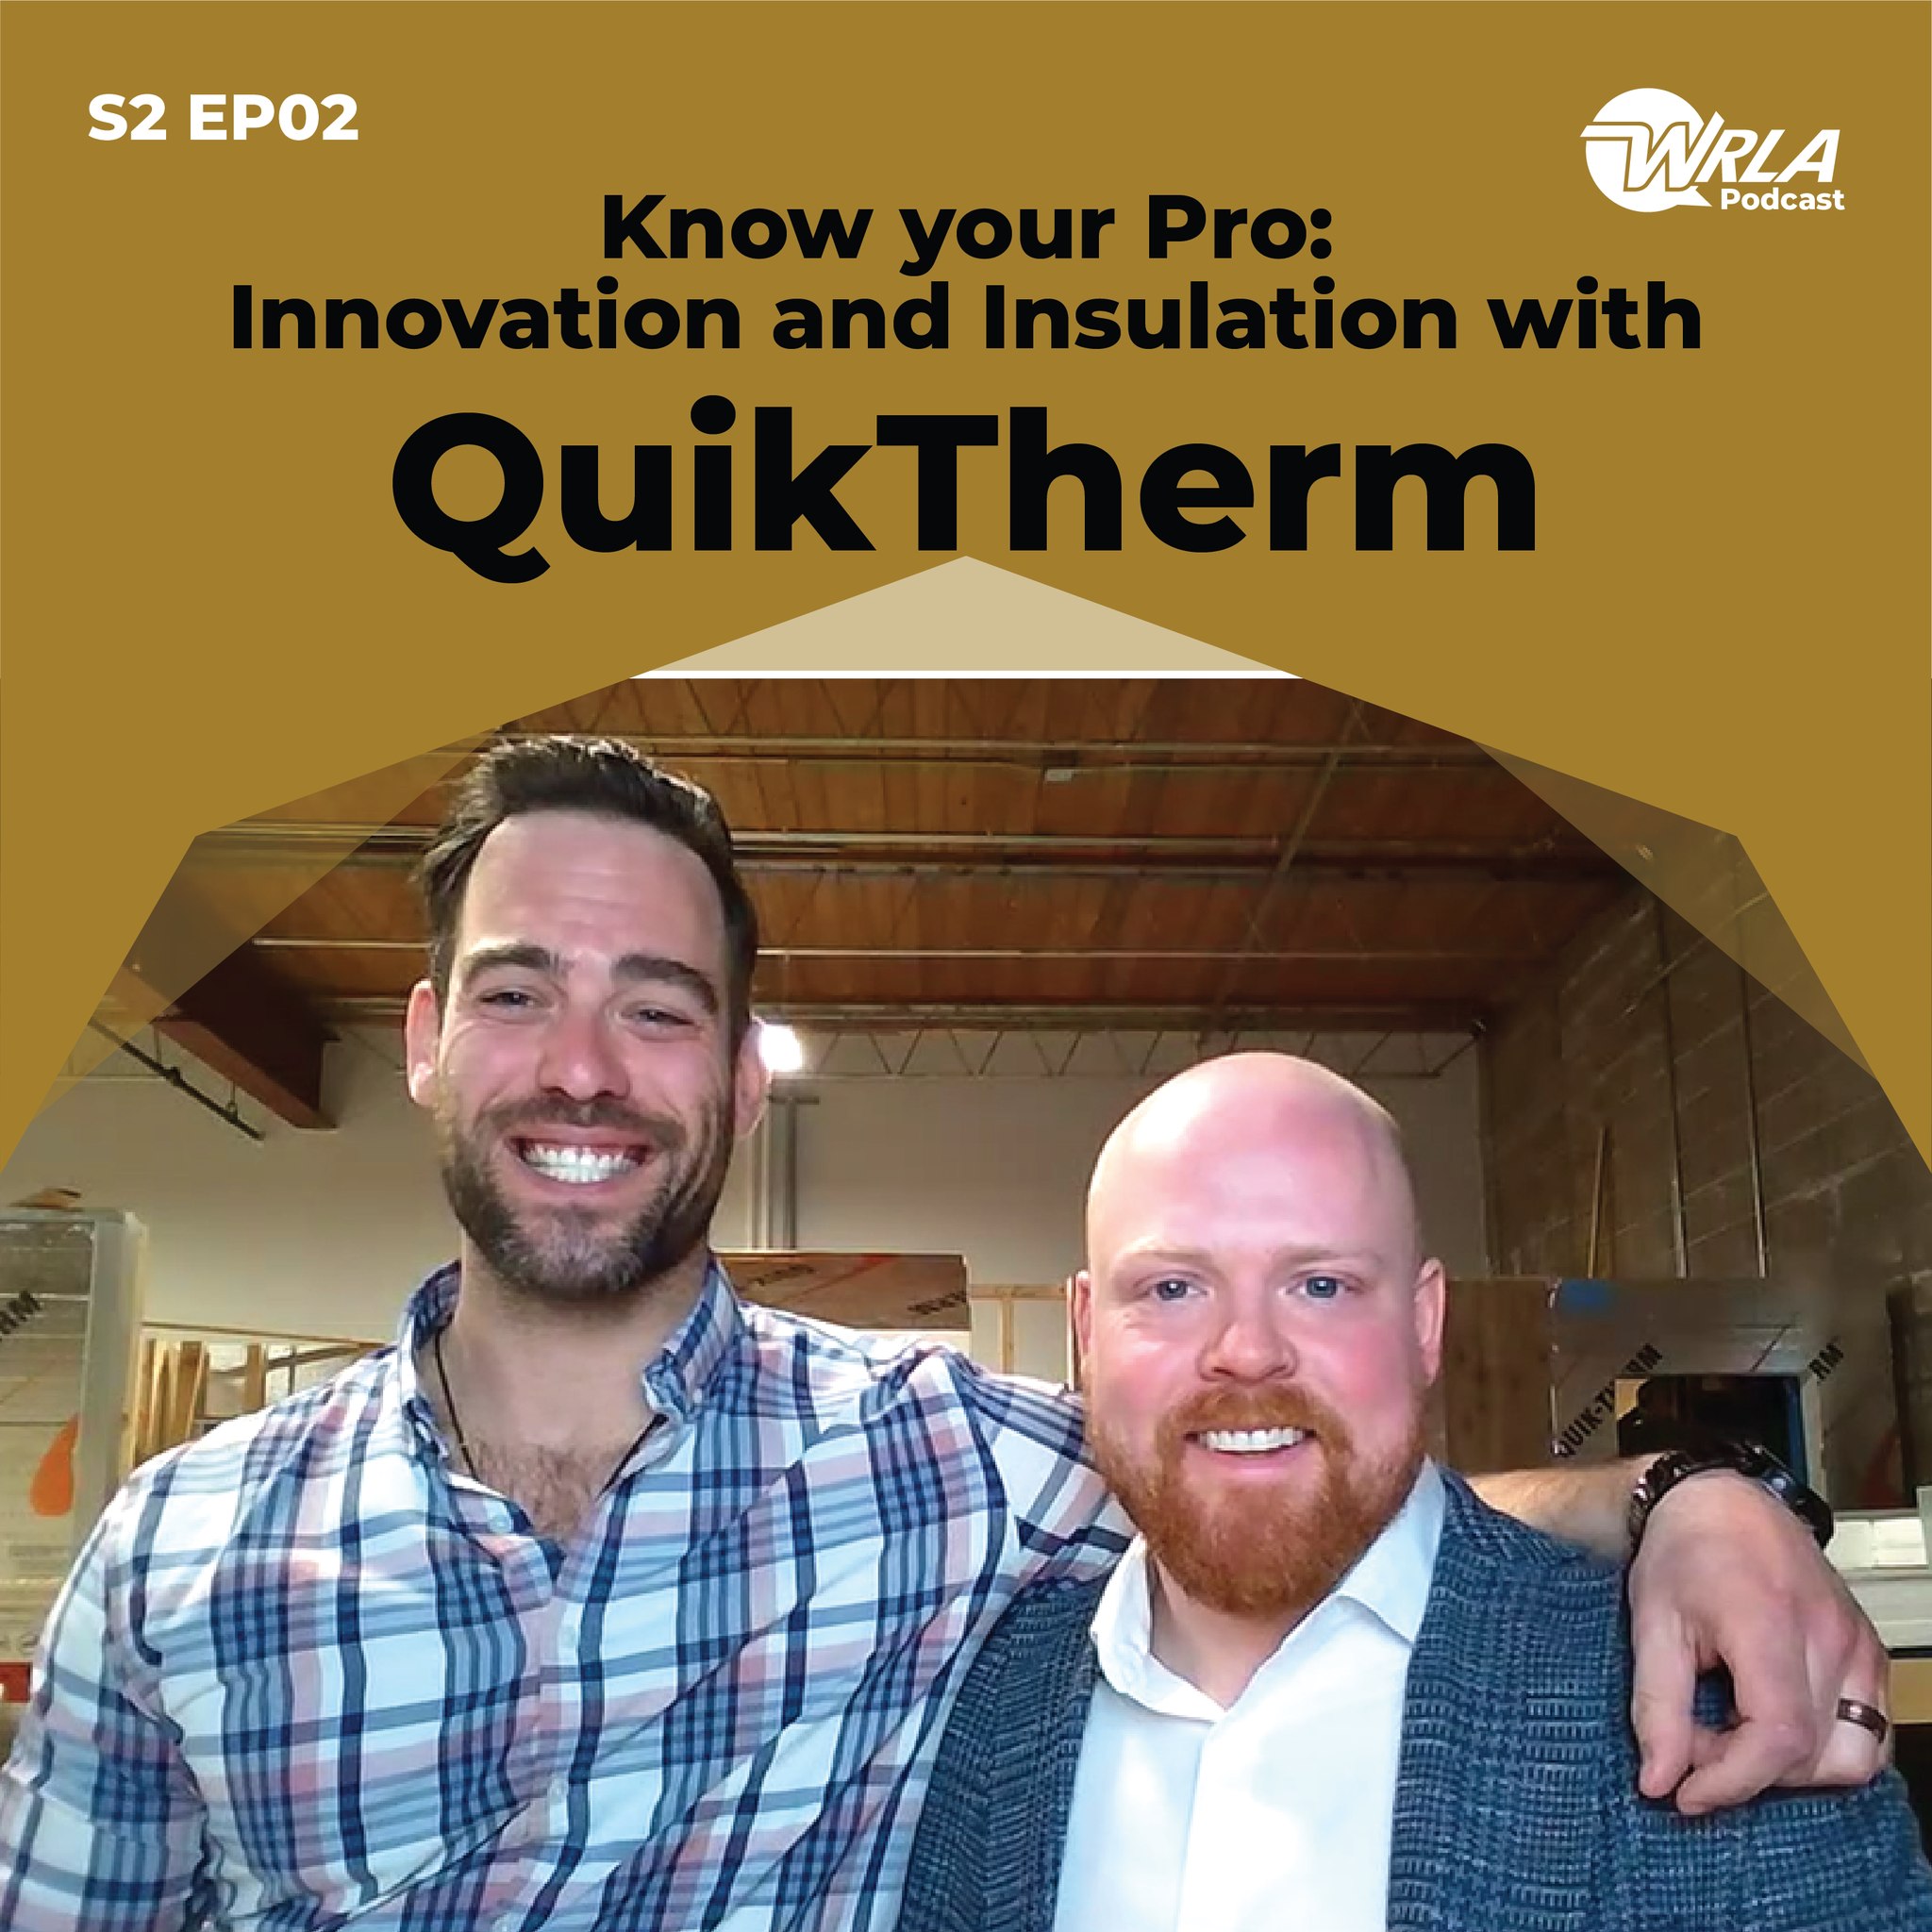 WRLA Podcast Season 2 Episode 2 Know Your Pro: Innovation and Insulation with Quick Therm